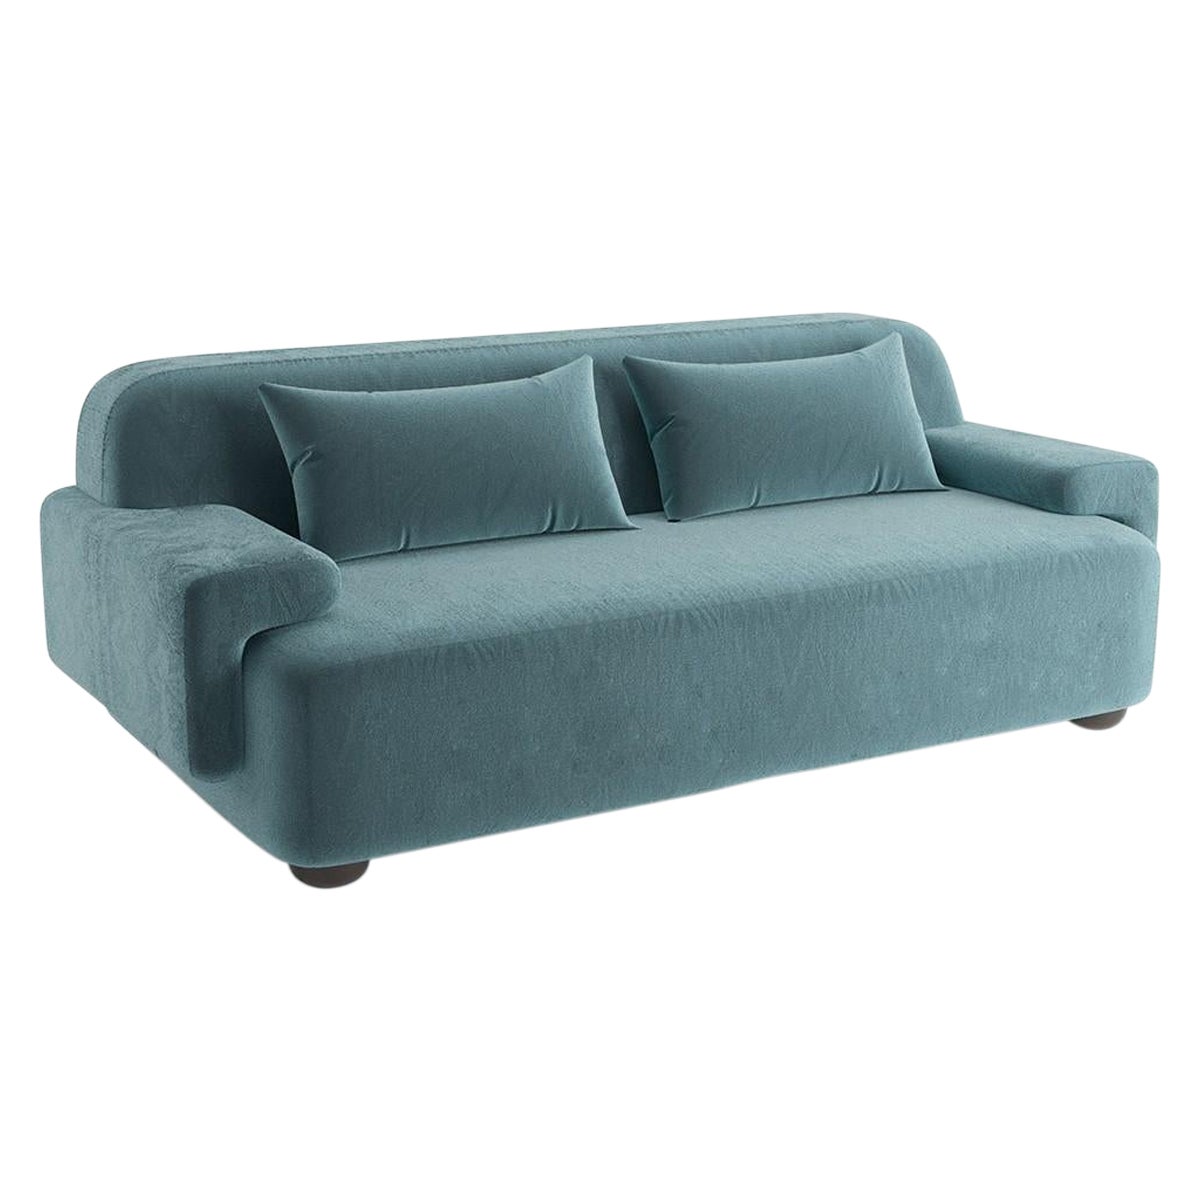 Popus Editions Lena 2.5 Seater Sofa in Blue Verone Velvet Upholstery For Sale